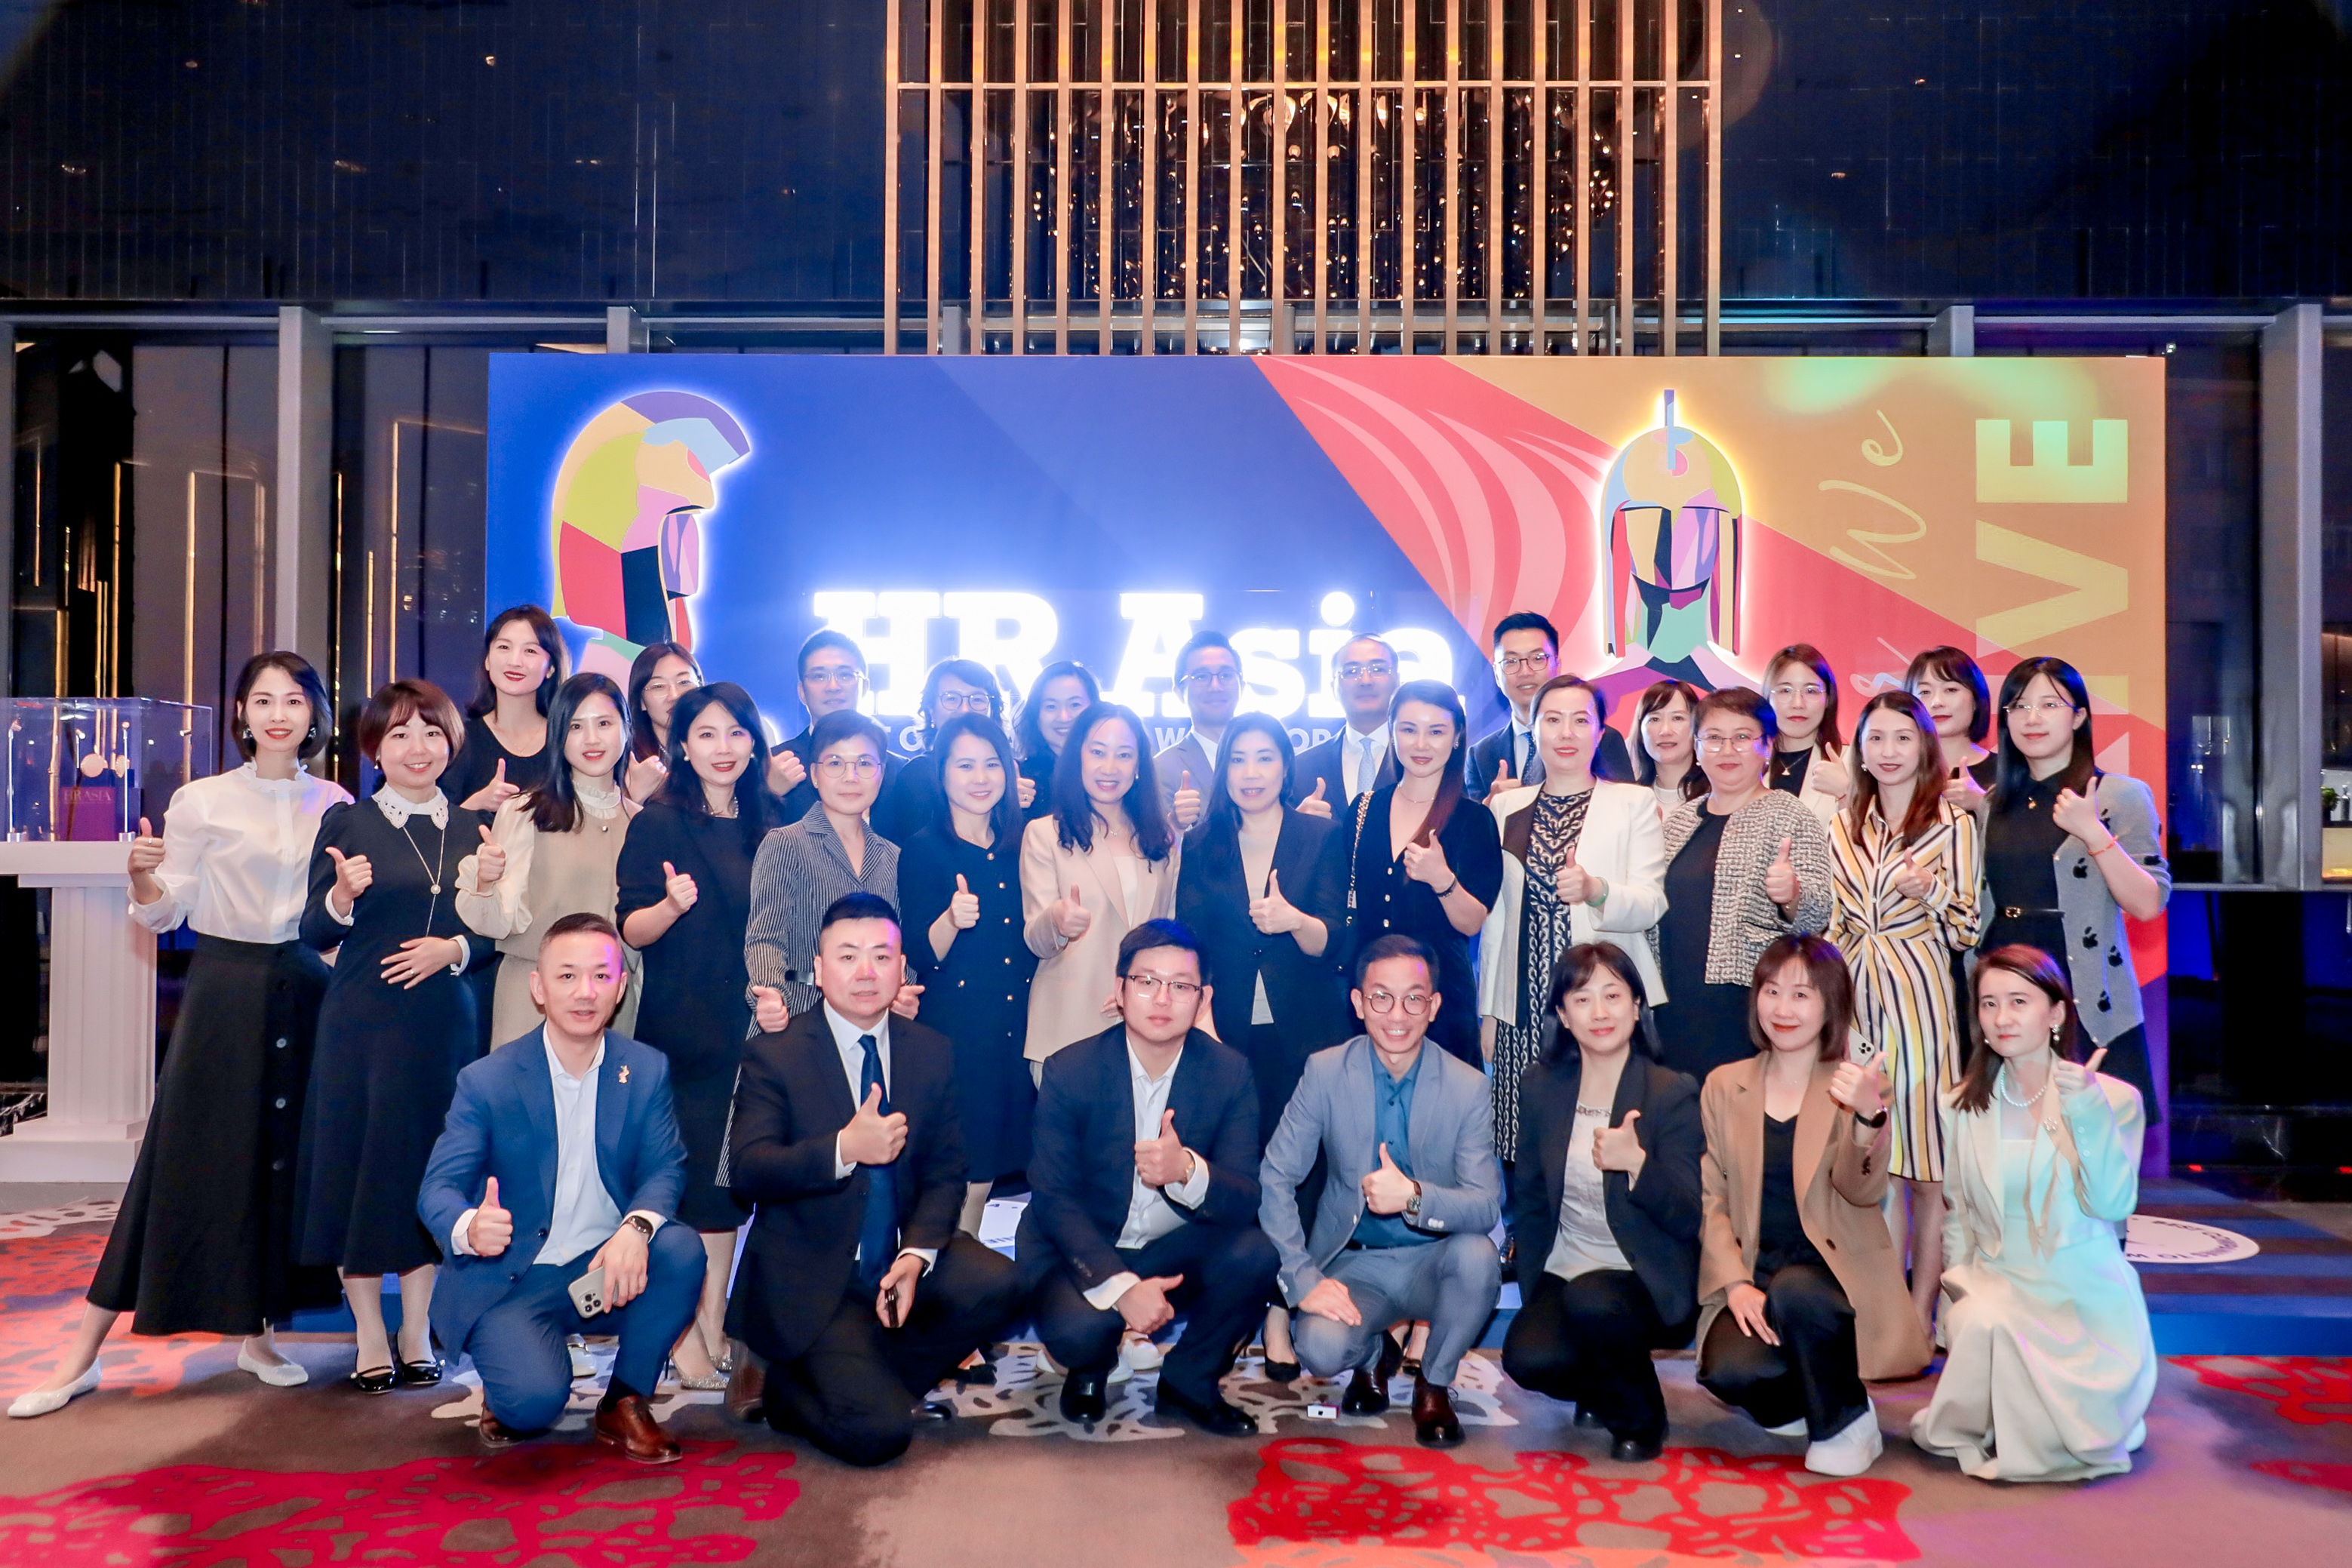 Hang Lung has been named one of the Best Companies to Work For in Asia 2023 by HR Asia, for demonstrating excellence in human resource management and concrete employee engagement initiatives